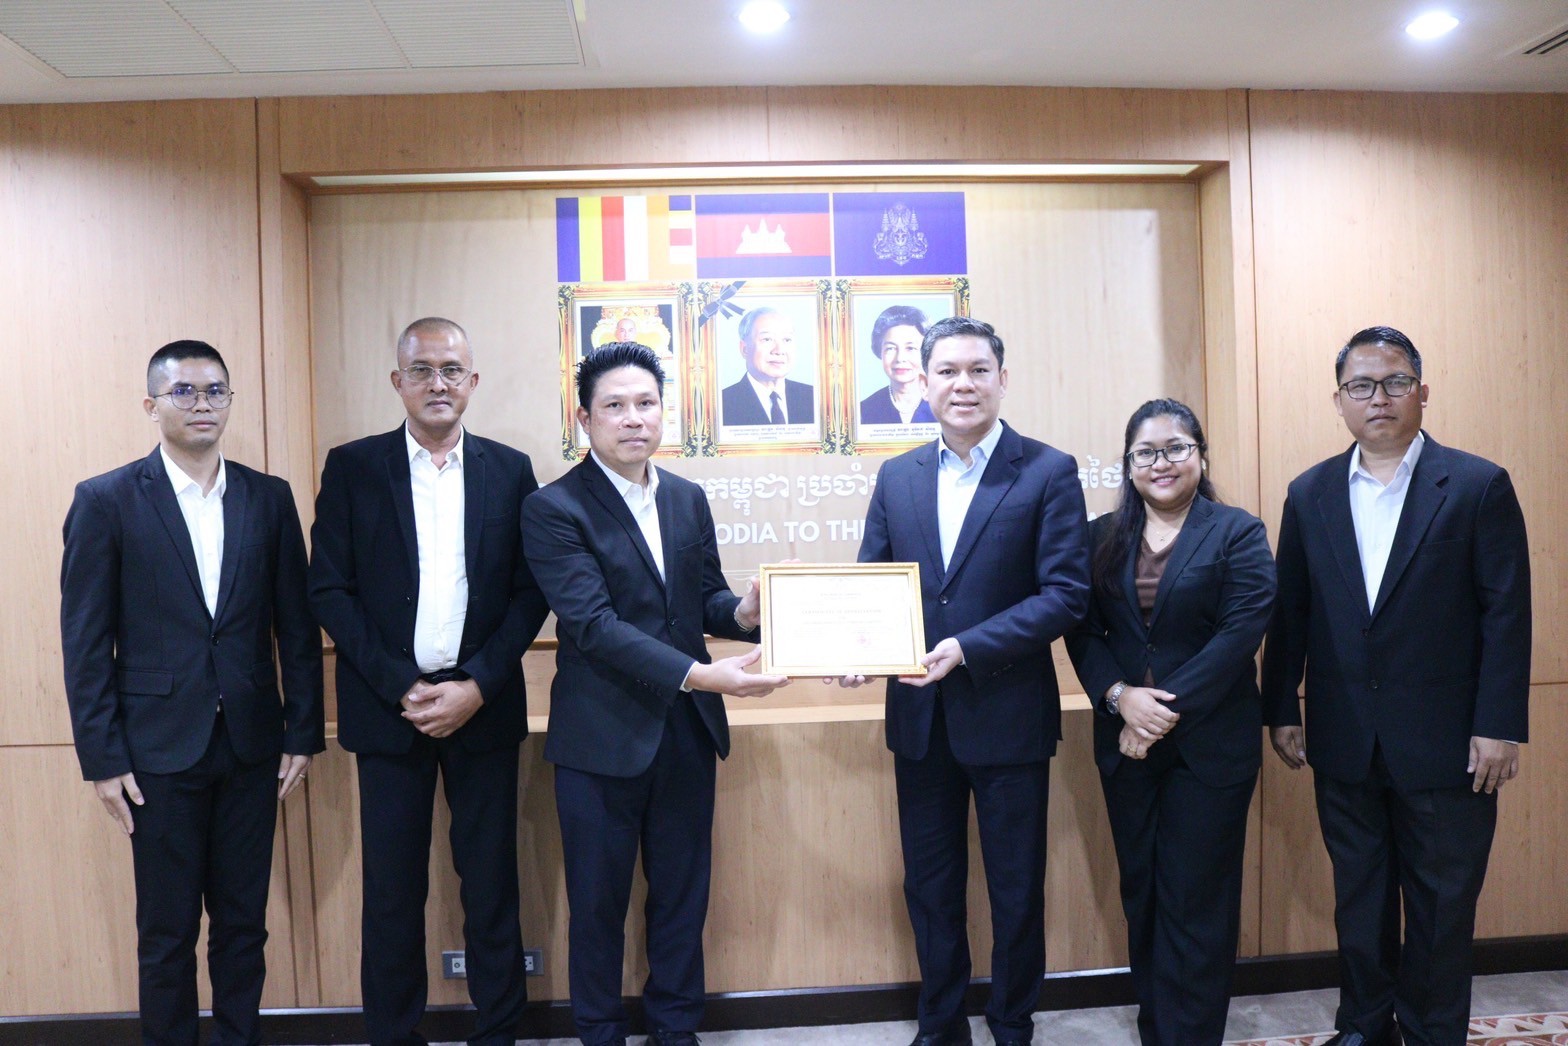 The Cambodian ambassador commends CP Foods’ exceptional treatment of migrant employees.